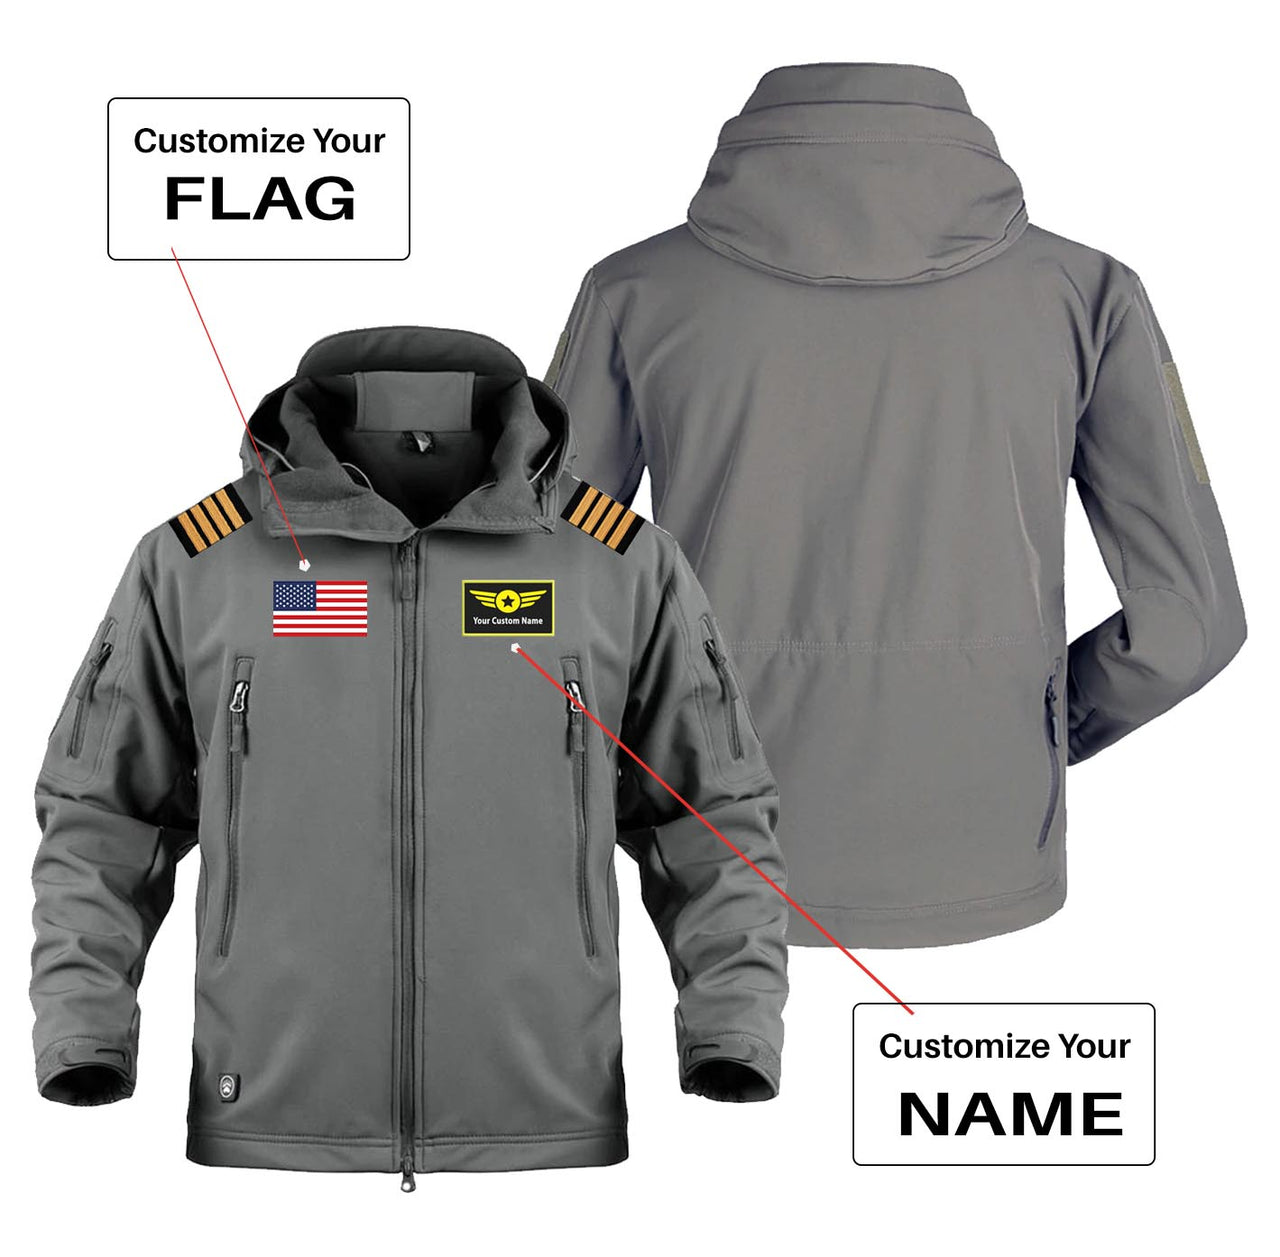 Custom Flag & Name with EPAULETTES (Special Badge) Military Pilot Jackets